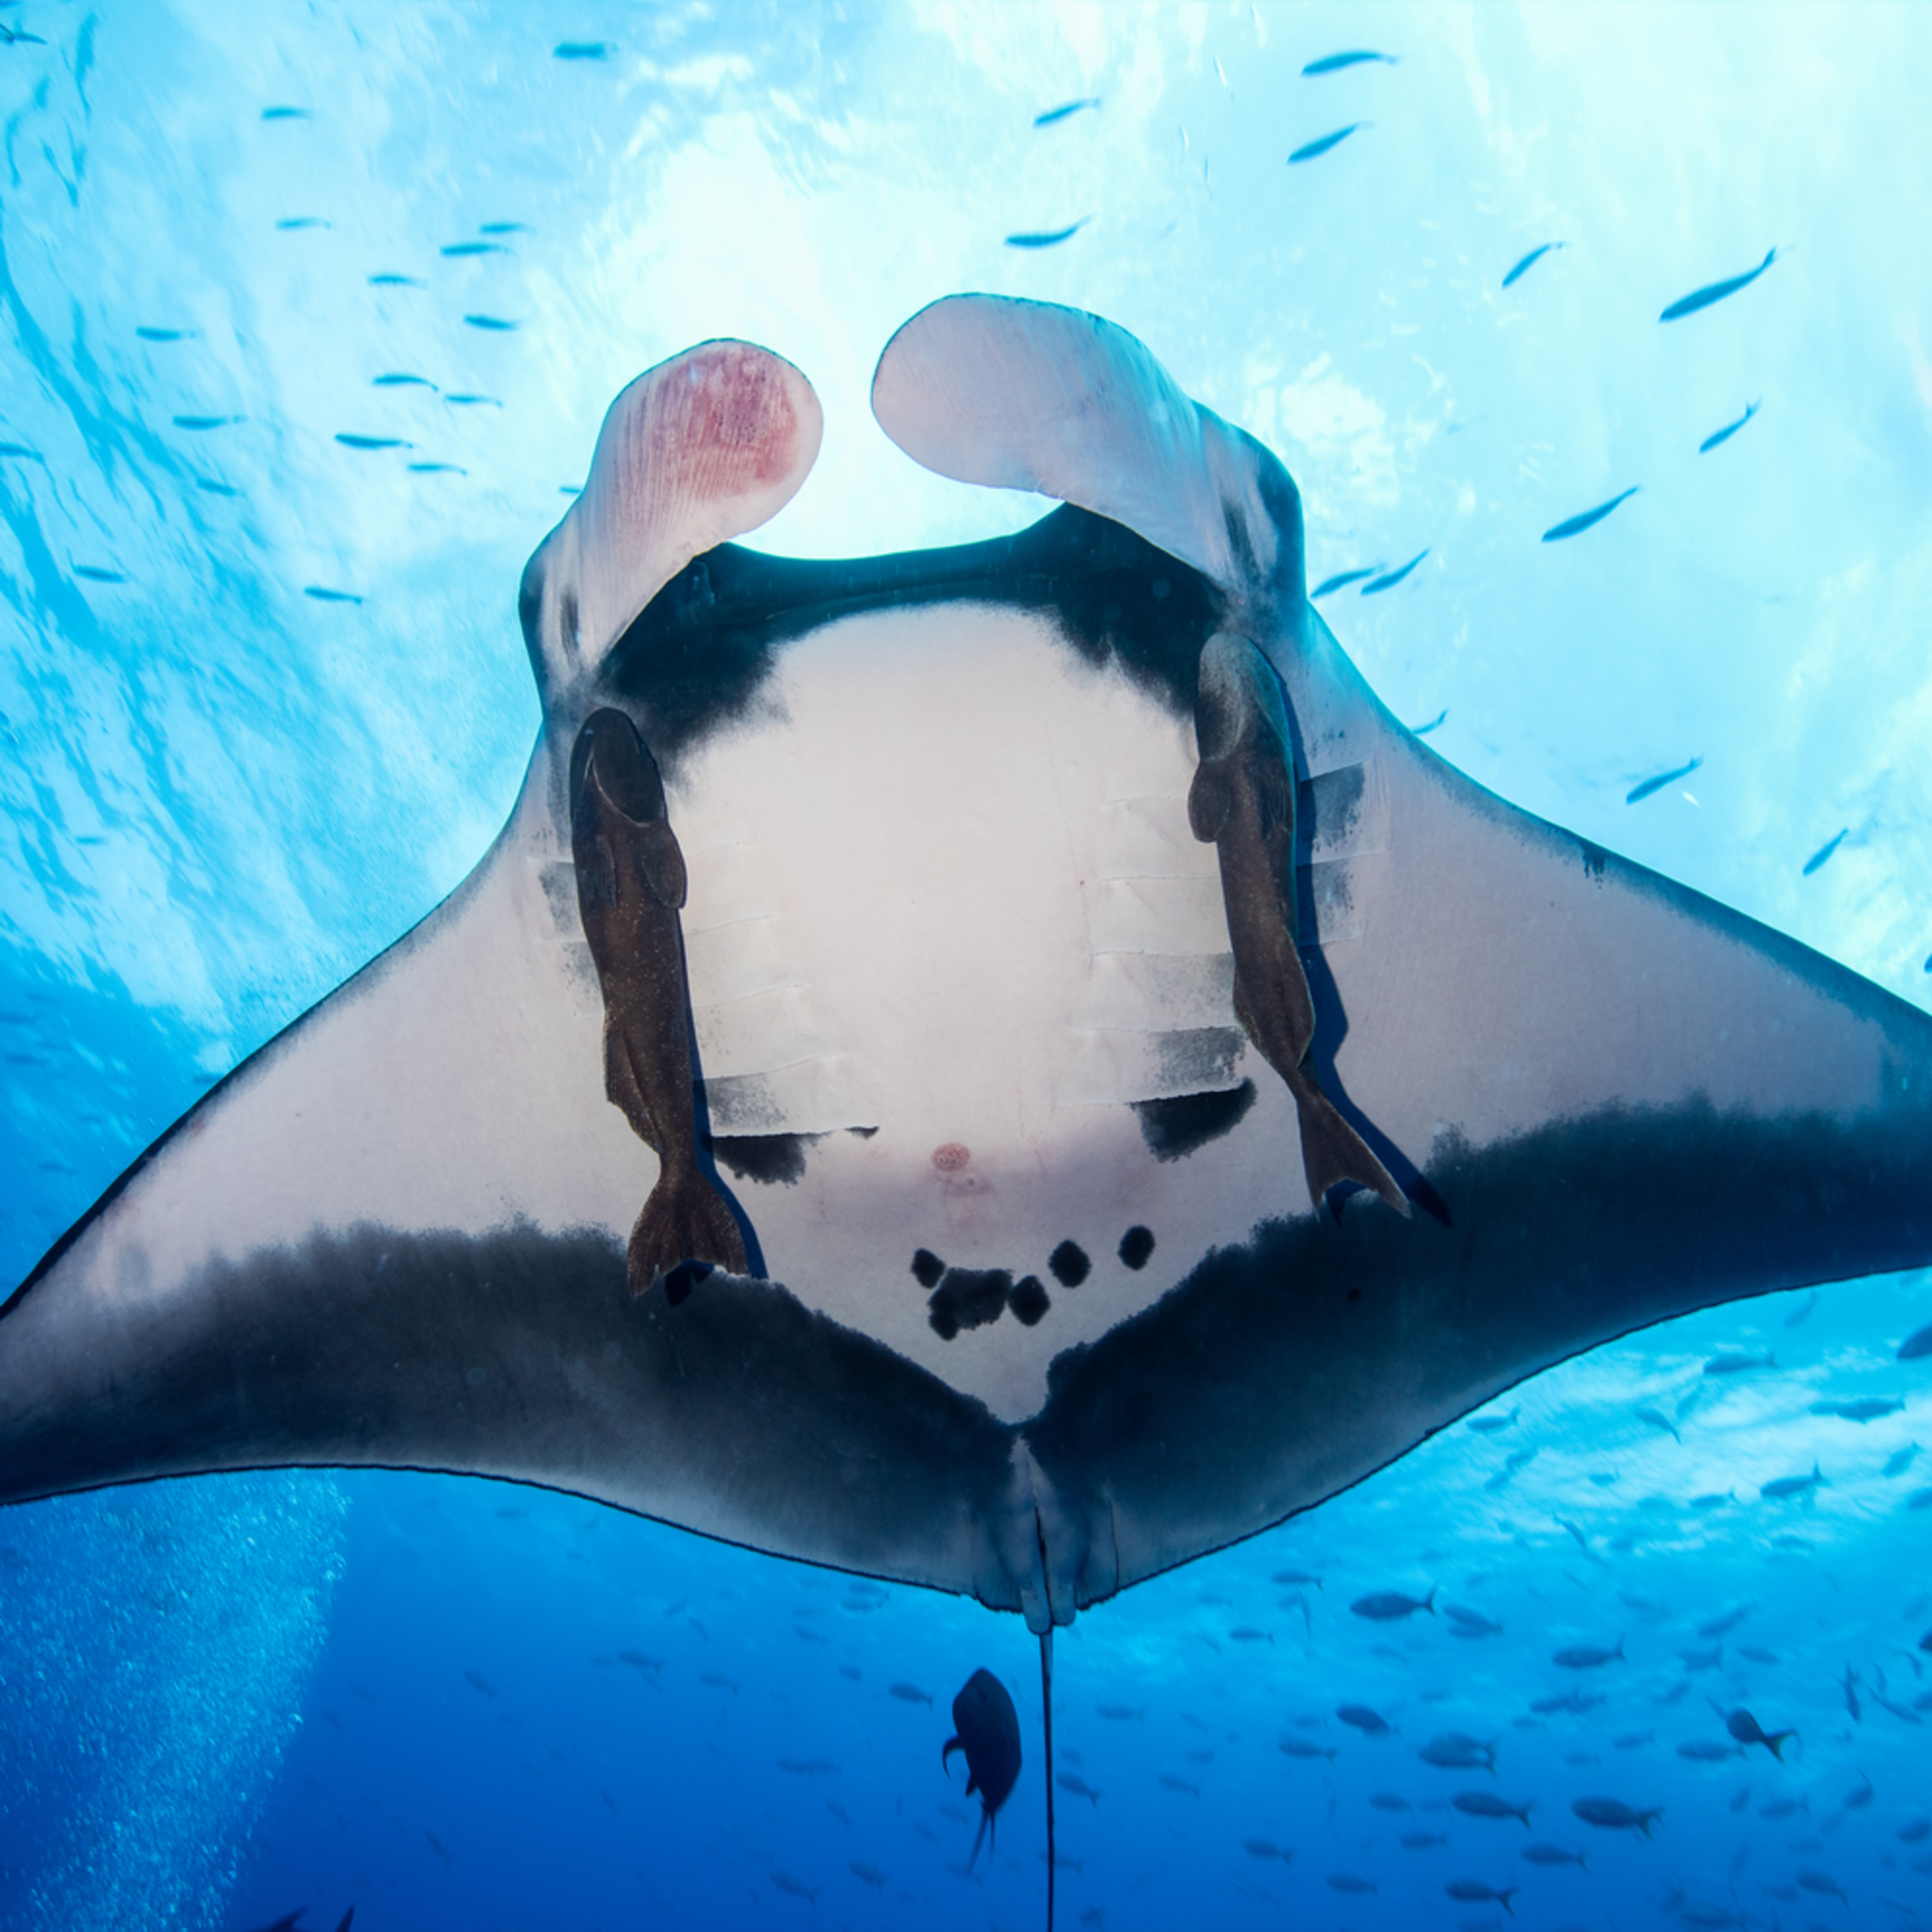 exterior structure of giant manta ray